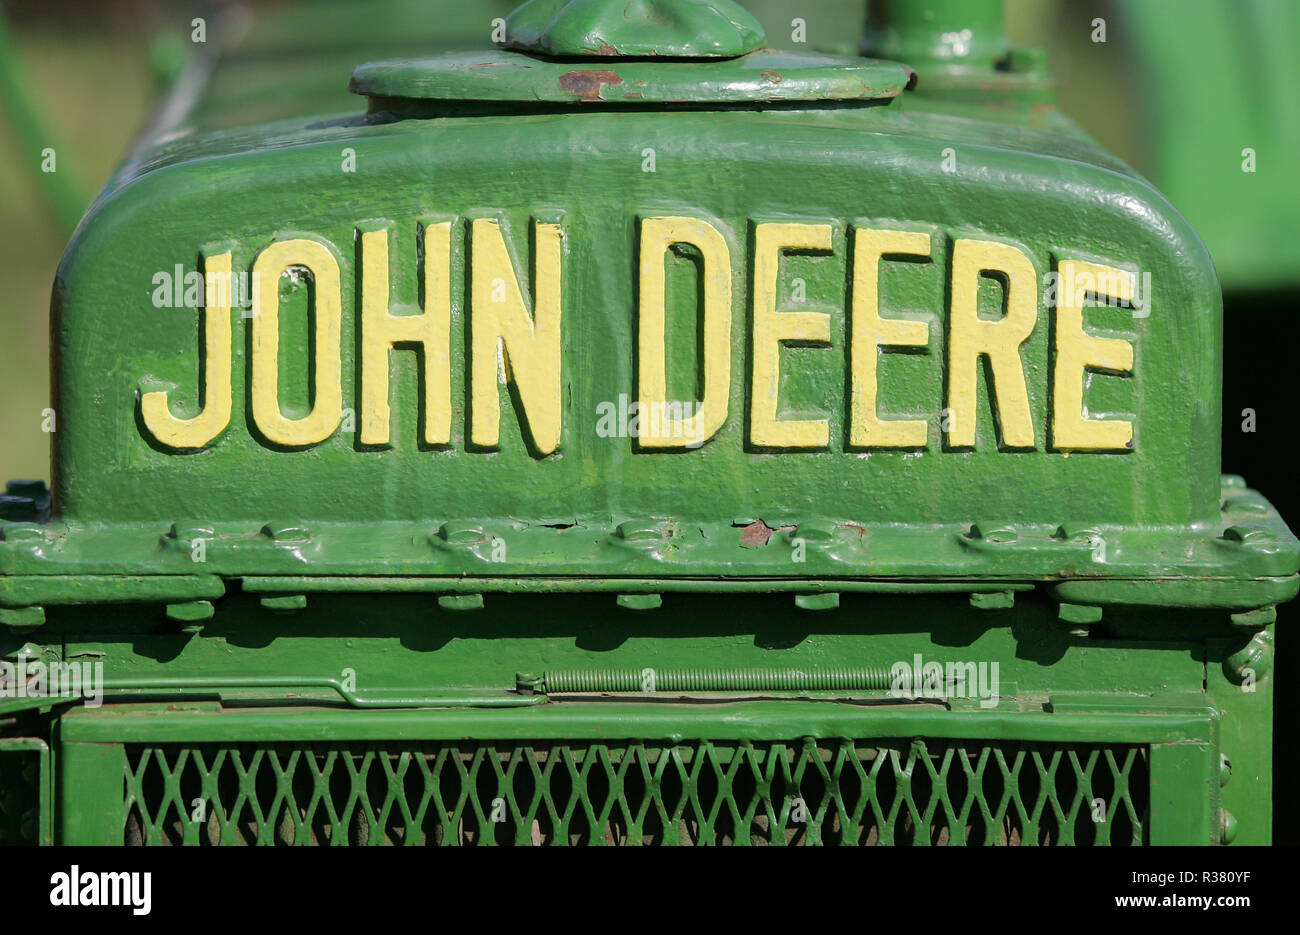 A John Deere tractor and emblem on display at a country fair. England ...